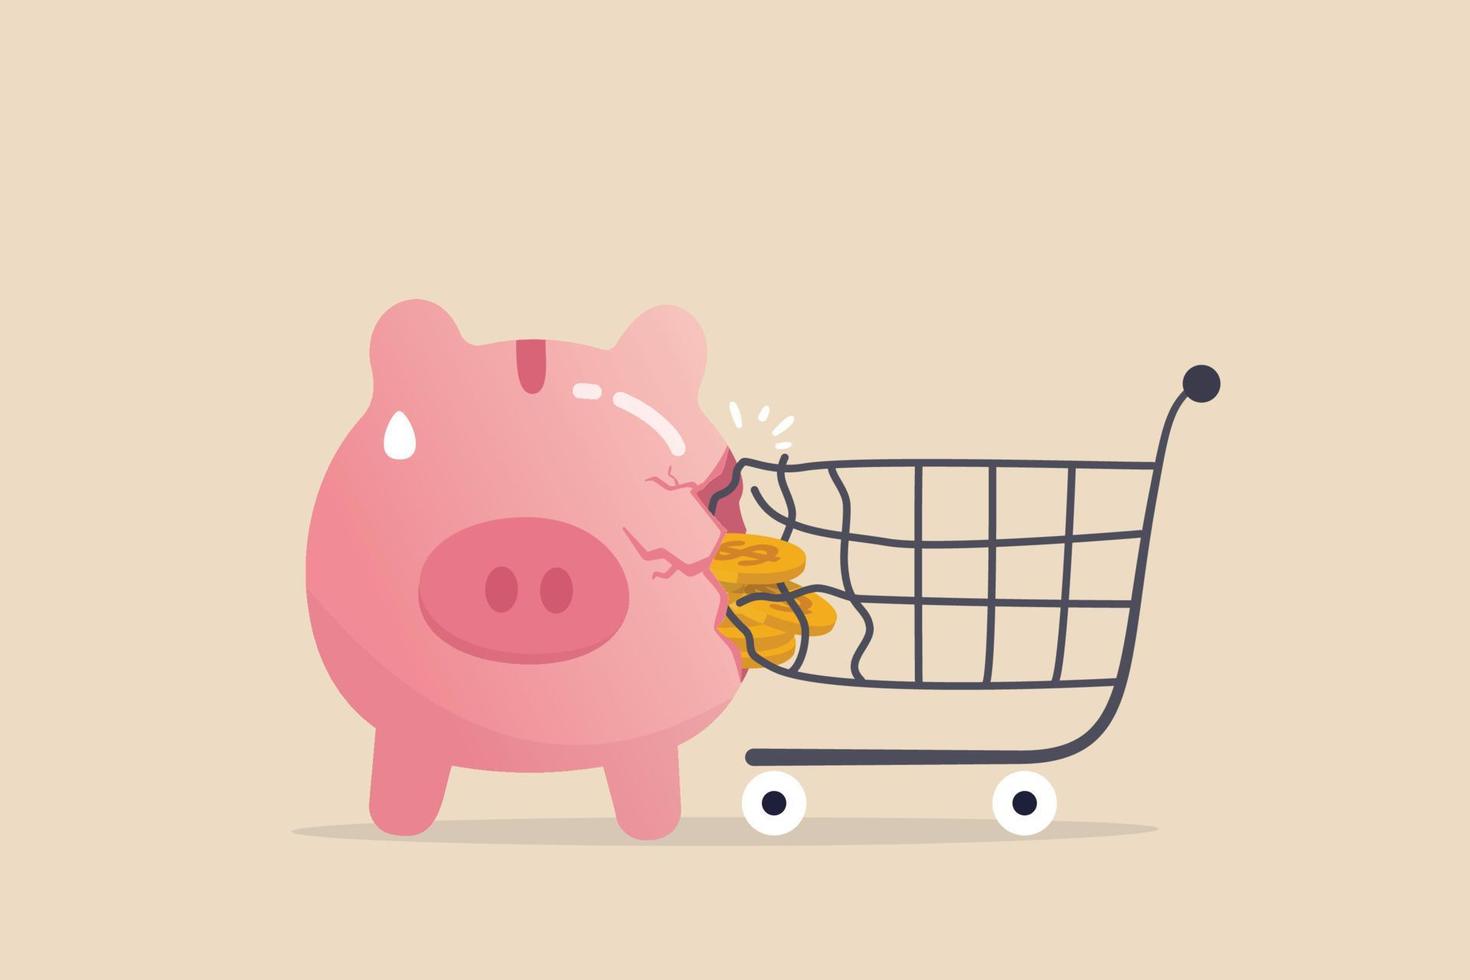 Overspending on shopping online causing debt, poverty, losing money or impact savings, over budget or financial failure concept, shopping cart trolley crash and broke sad saving or budget piggy bank. vector